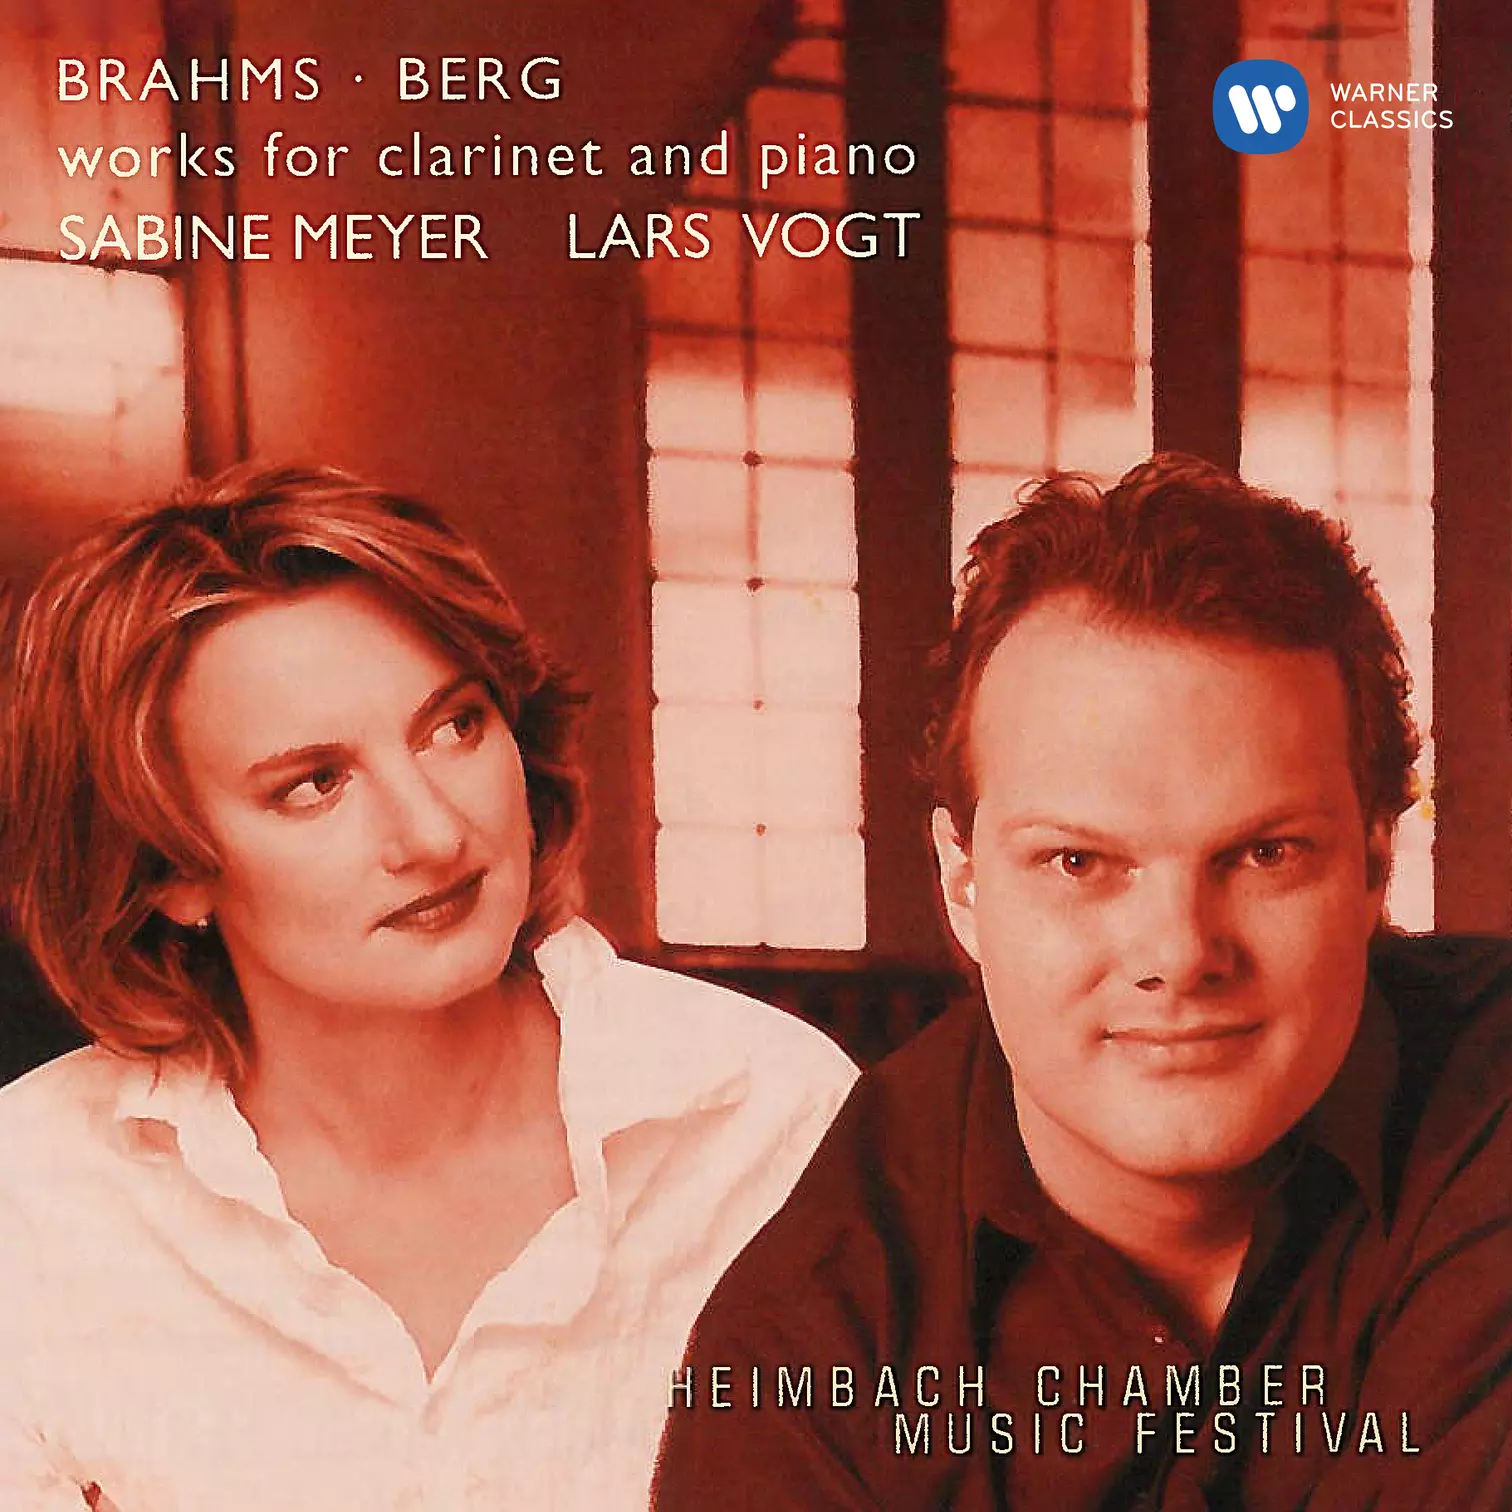 Brahms & Berg: Works for Clarinet and Piano (Live at Heimbach Spannungen Festival, 2002)